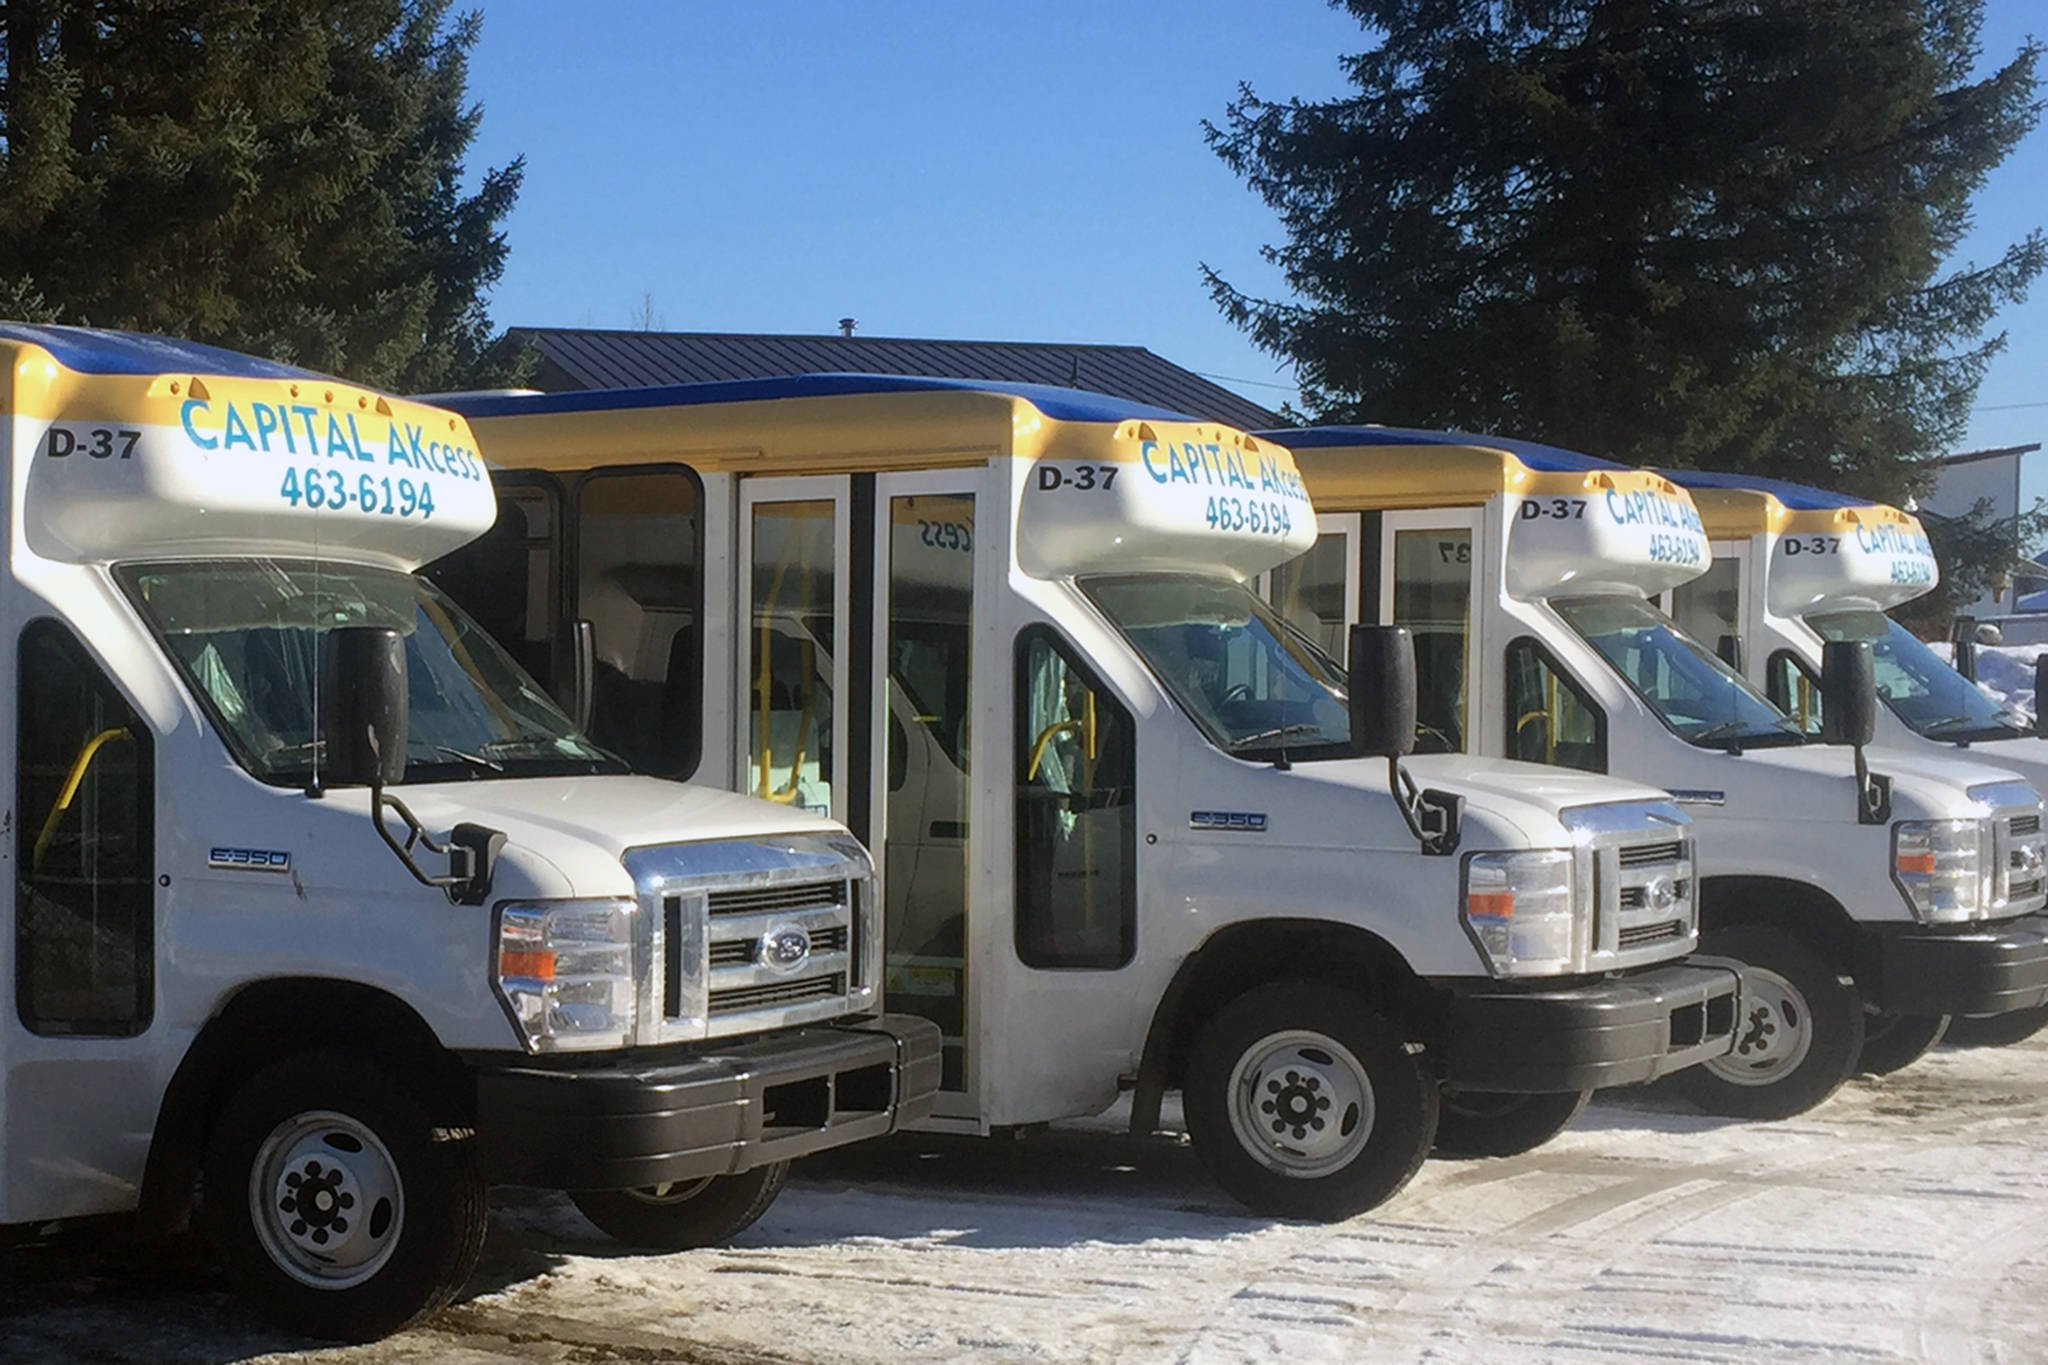 Care-A-Van, Juneau’s paratransit service, is being rebranded as Capital AKcess, and some vehicles are already sporting the new name. The service may also have a new operator. (Courtesy Photo | City and Borough of Juneau)